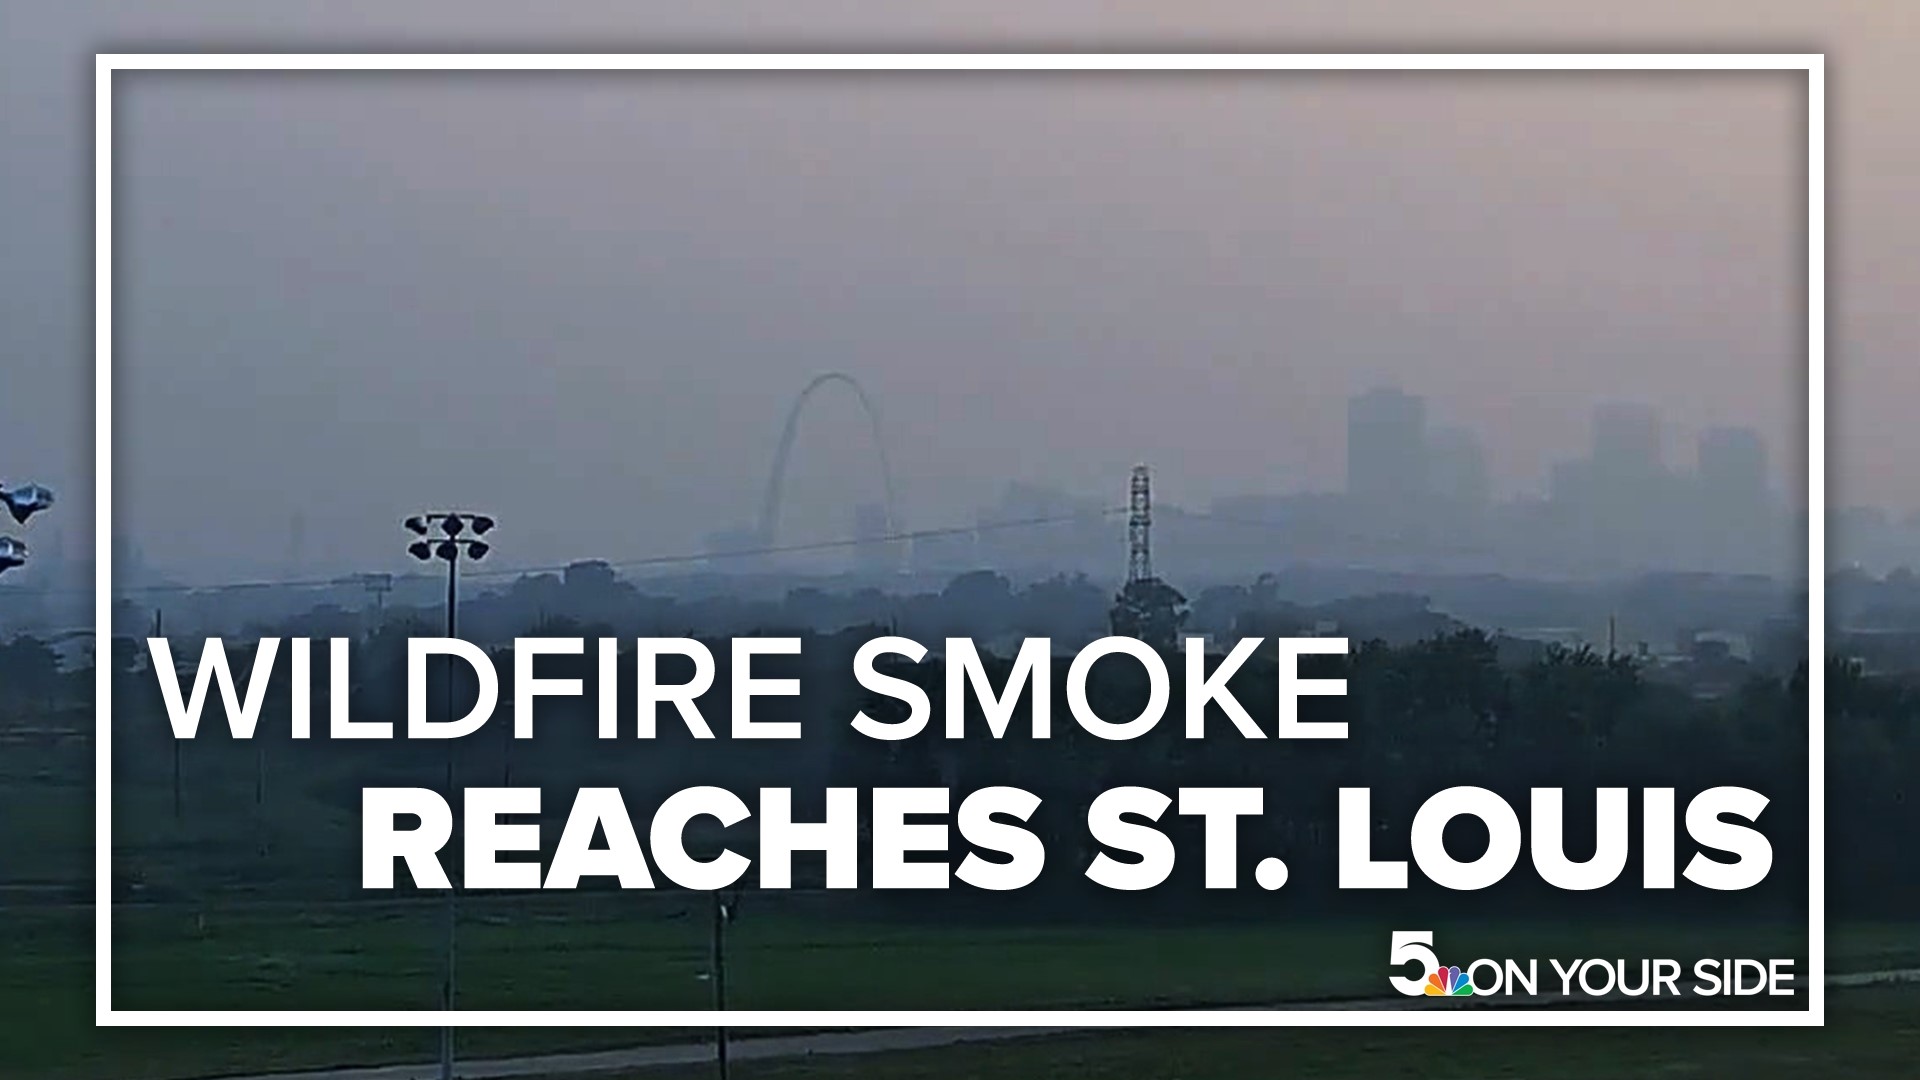 Smoke levels are expected to be the highest Wednesday morning. Exposure can cause coughing, trouble breathing, asthma attacks and irritation in the eyes and sinuses.